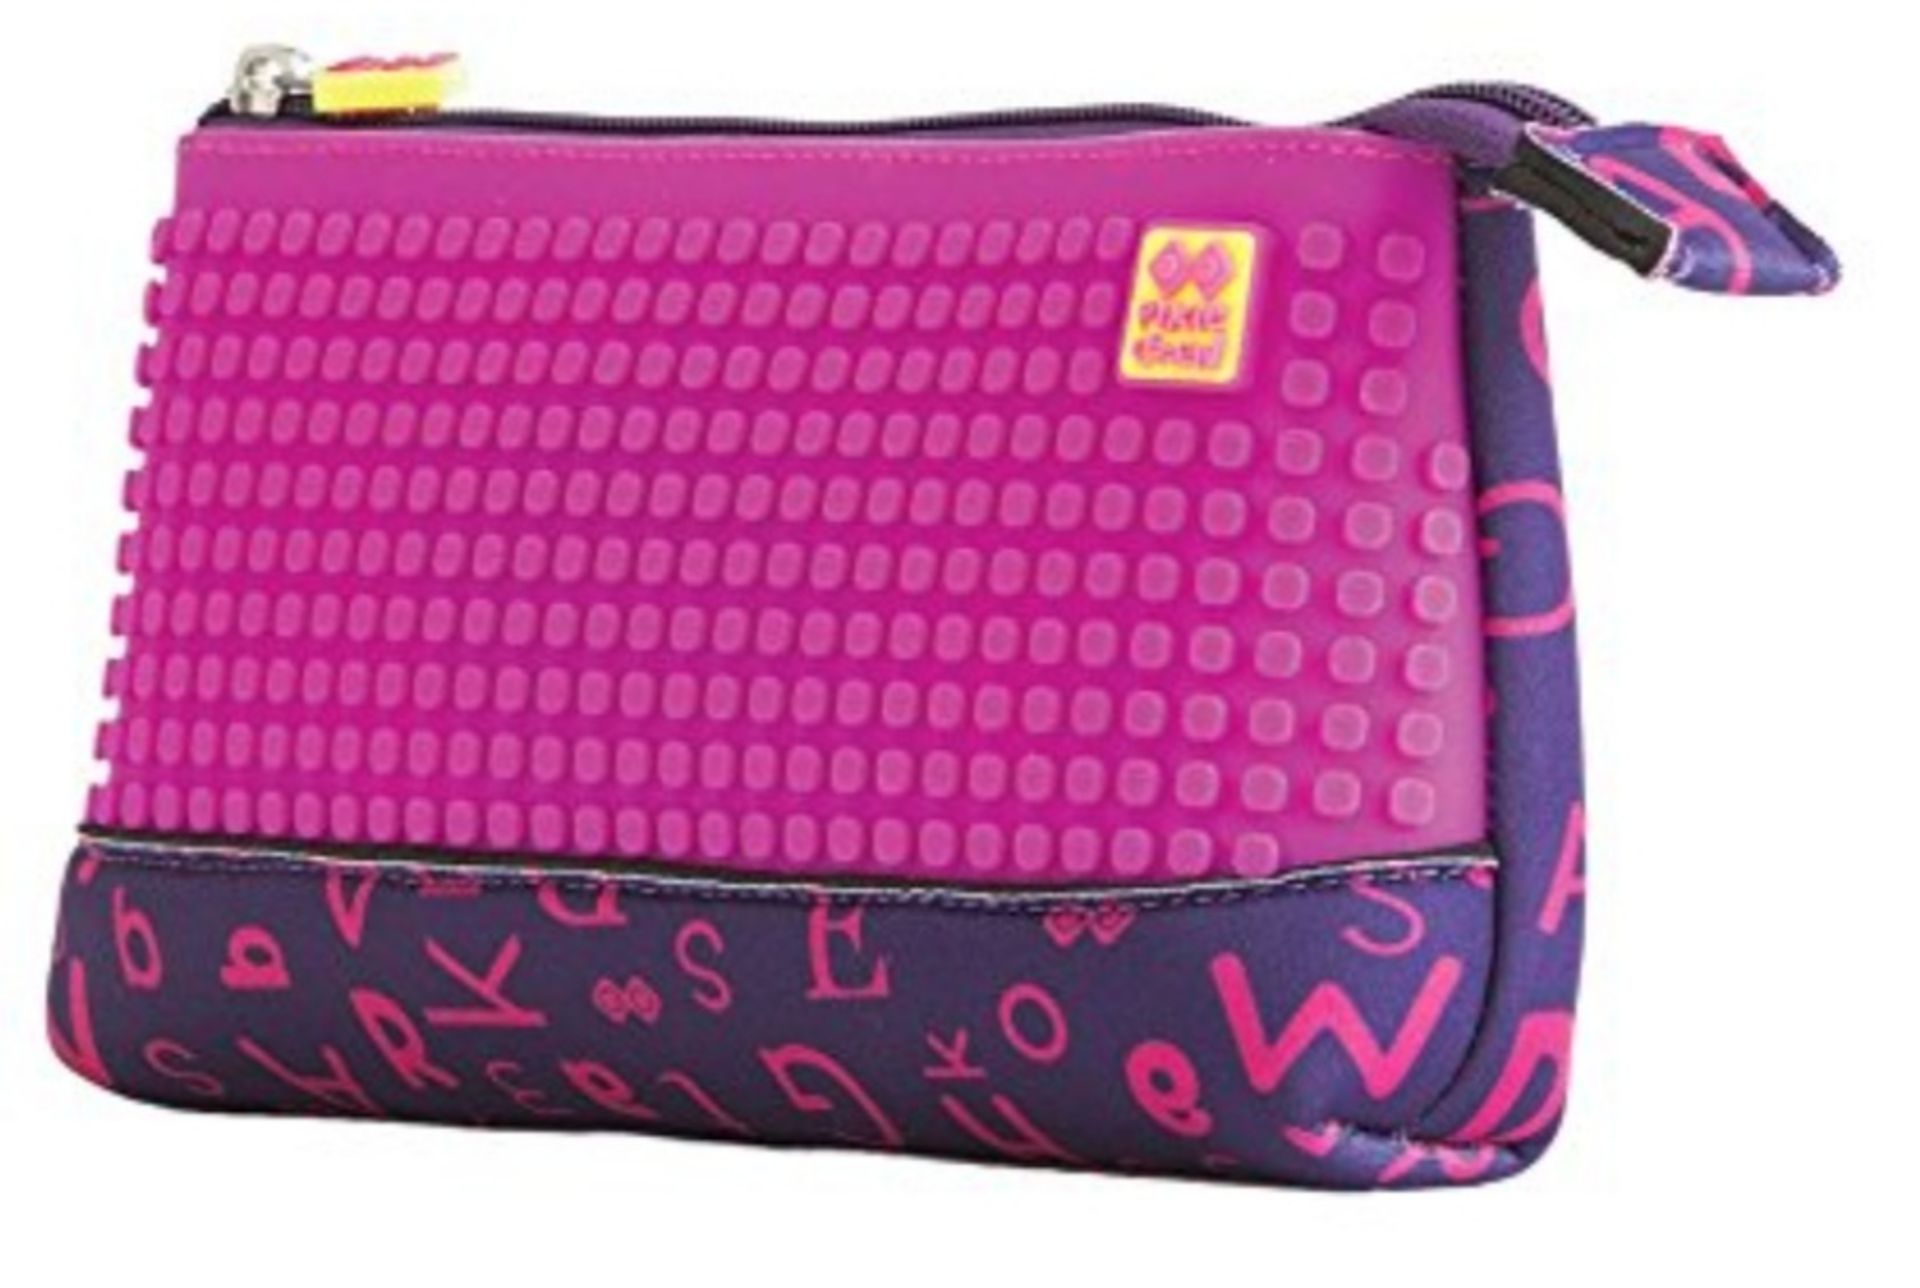 X 2 BRAND NEW PIXIE CREW CREATIVE LARGE POUCH WITH LETTERS AND 100 PIXELS FOR FREE. TOTAL RRP £28.